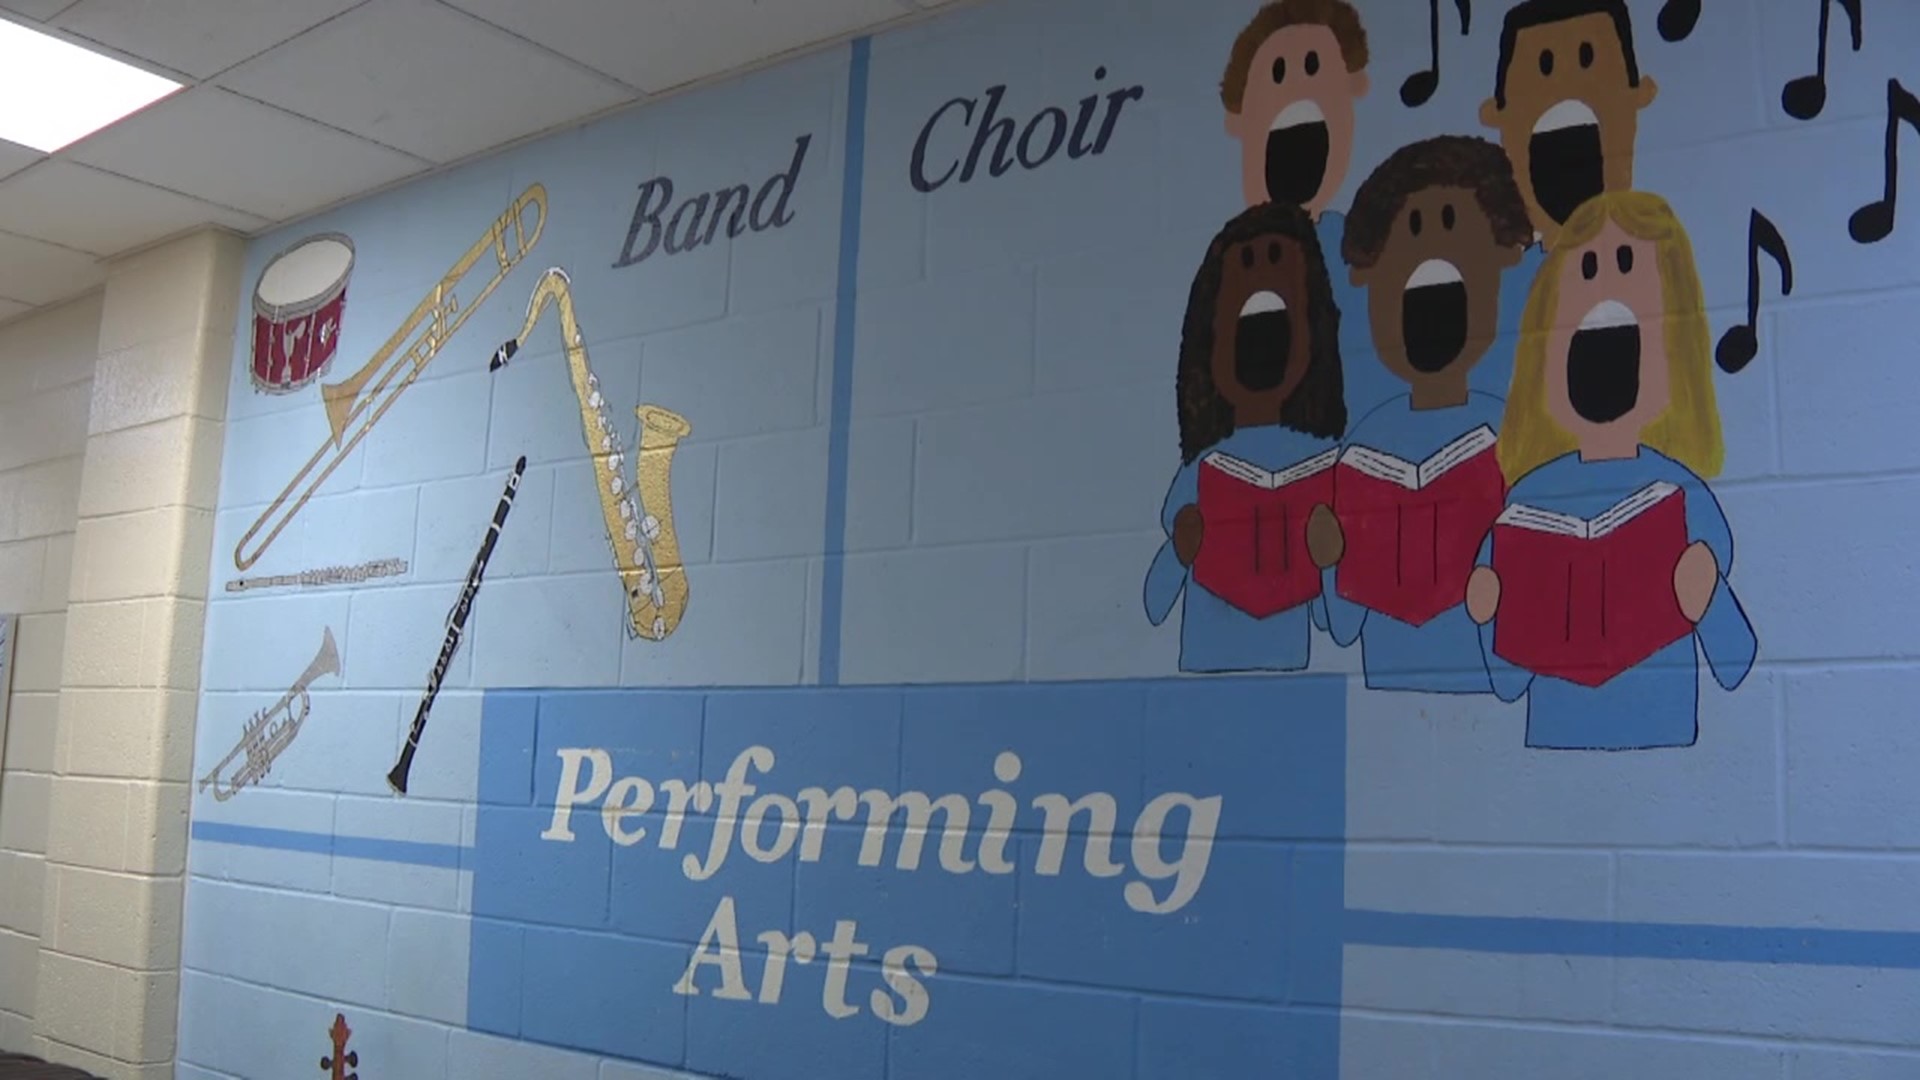 A high school student in Clinton County wants to recognize teachers and students for their talents in music and art.